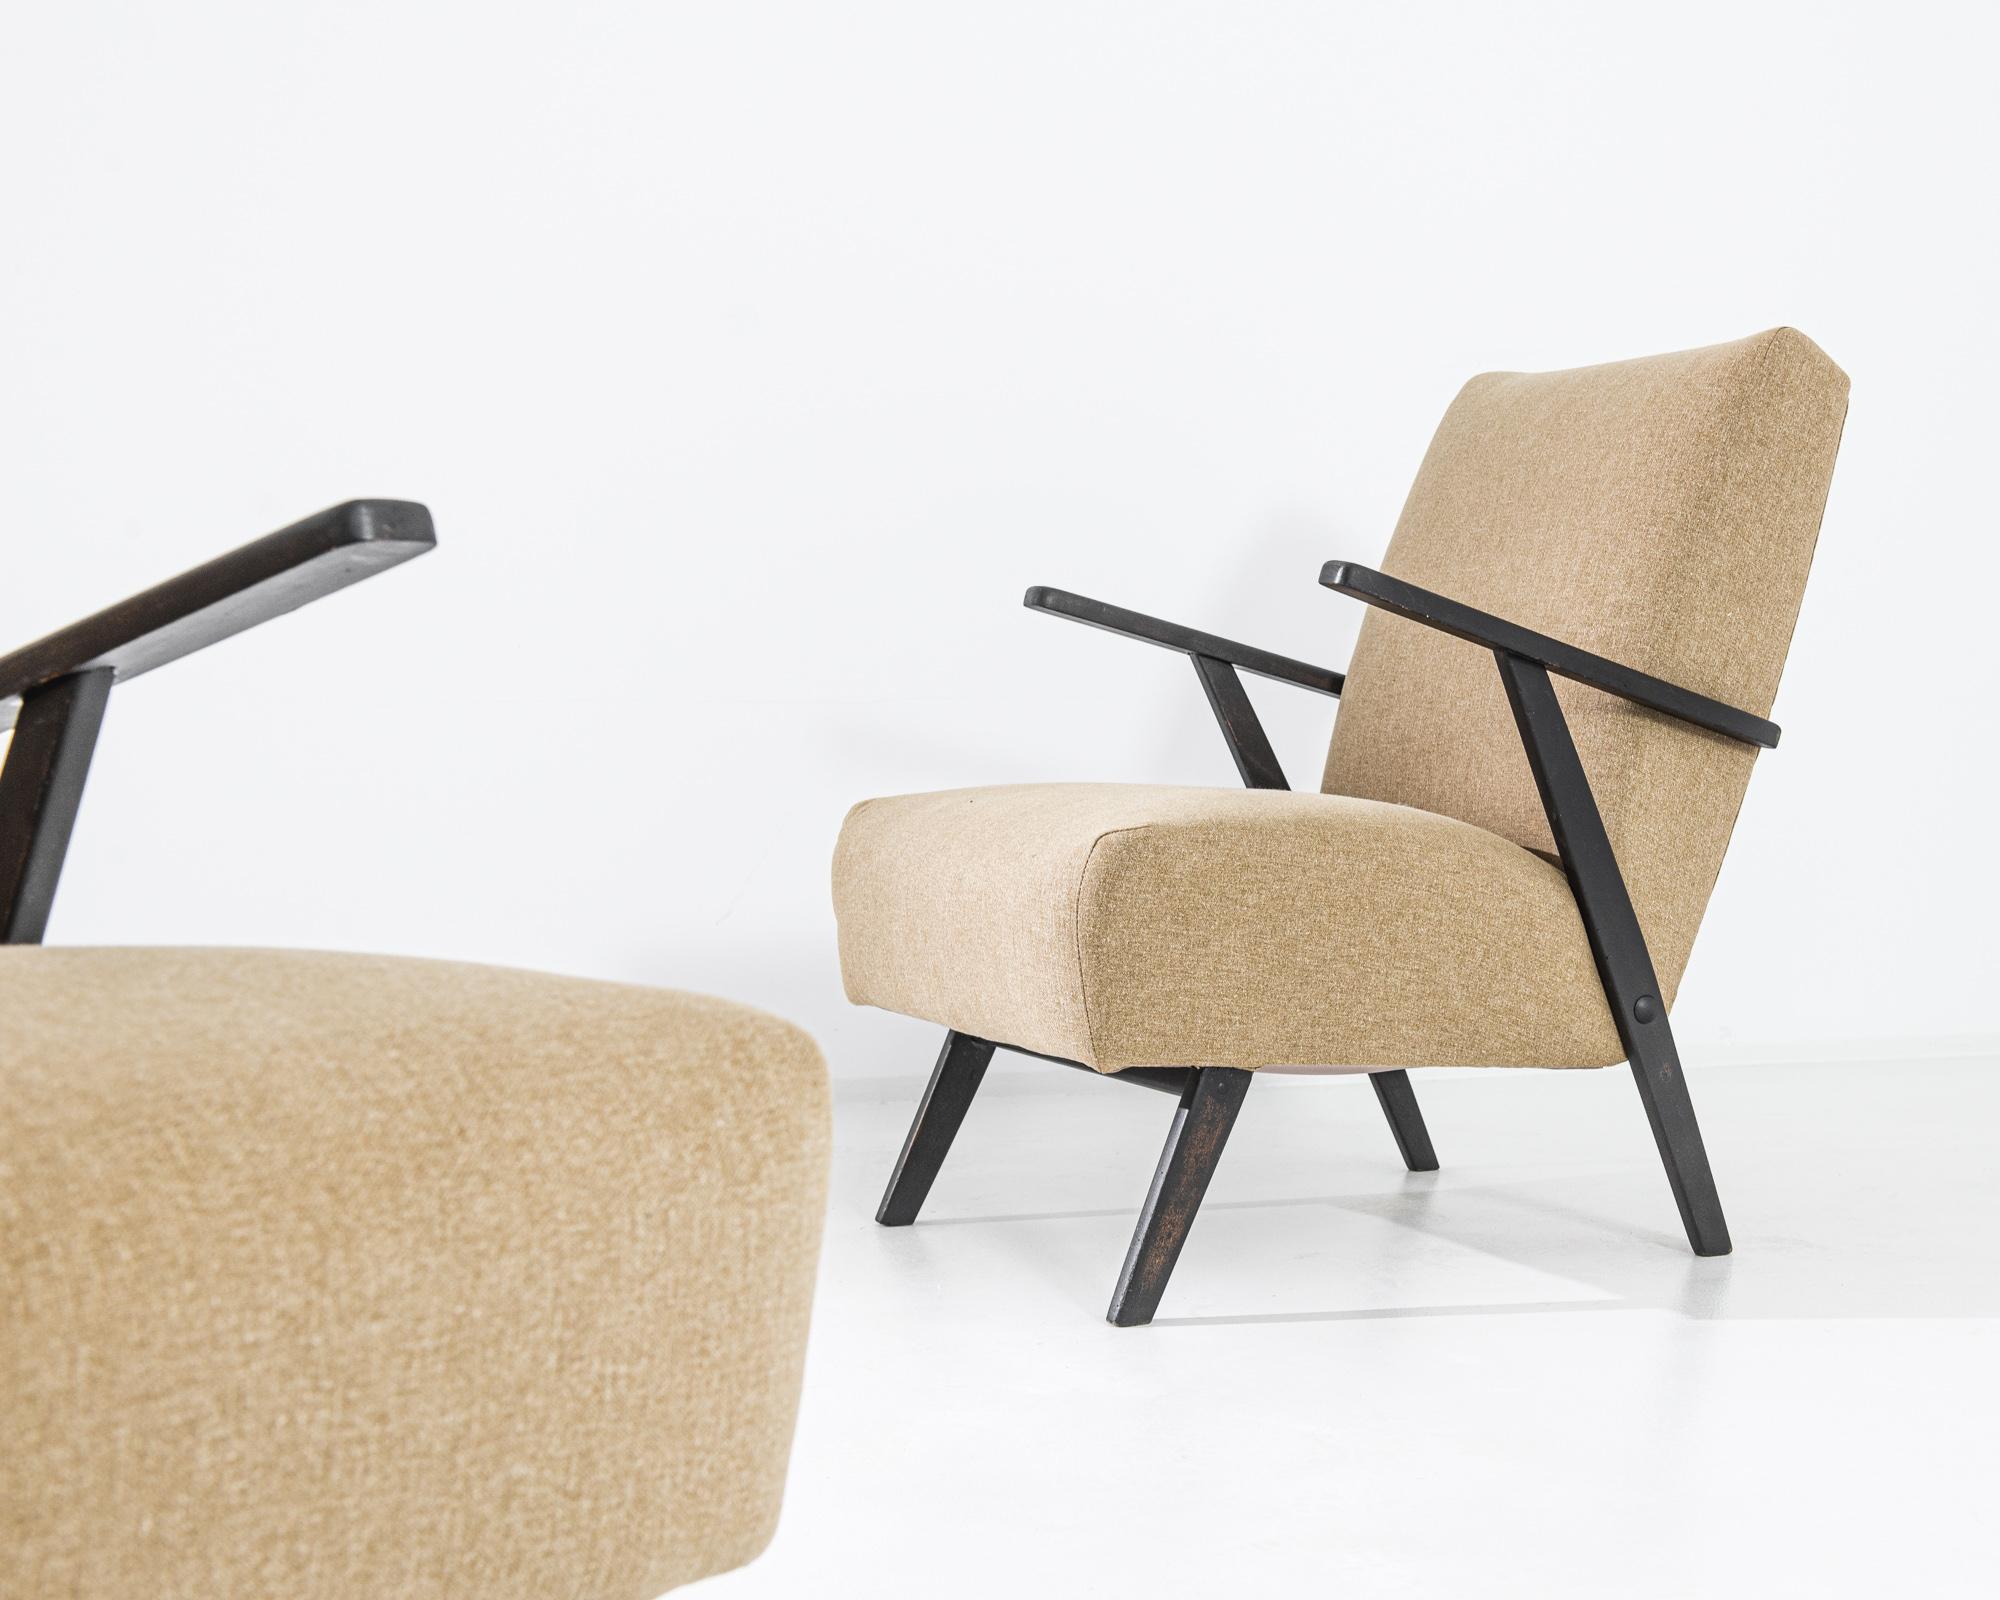 Immerse yourself in the mid-century allure with a set of two 1960s Czechia Wooden Armchairs. Upholstered in a timeless beige, these chairs exude elegance, while the sleek black arms and legs provide a striking contrast. Crafted with meticulous